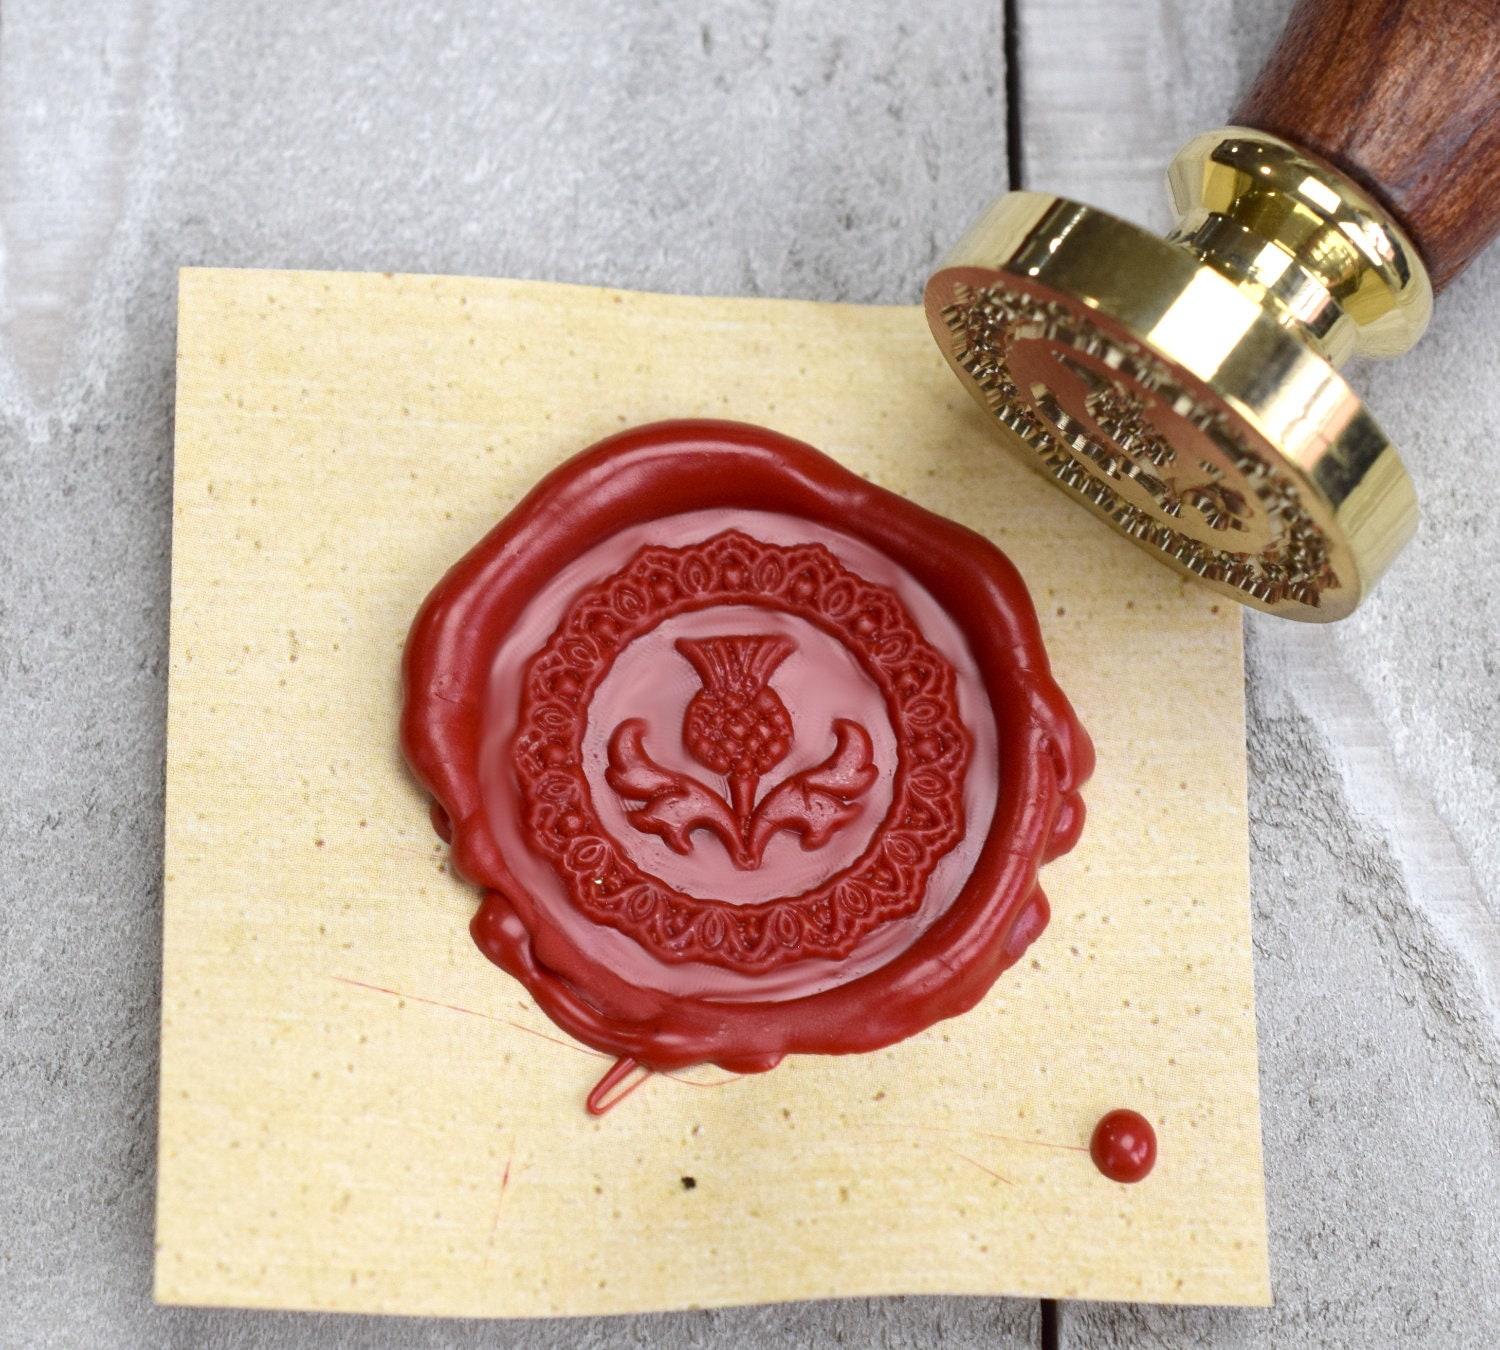 Wax Seal Stamp Set, YOSENLING 6 Pcs Starry Animal Cat Fox Wax Seal Stamp Kit, Vintage Personalized Wax Seal Stamp for Letter Cards Invitations,Gift